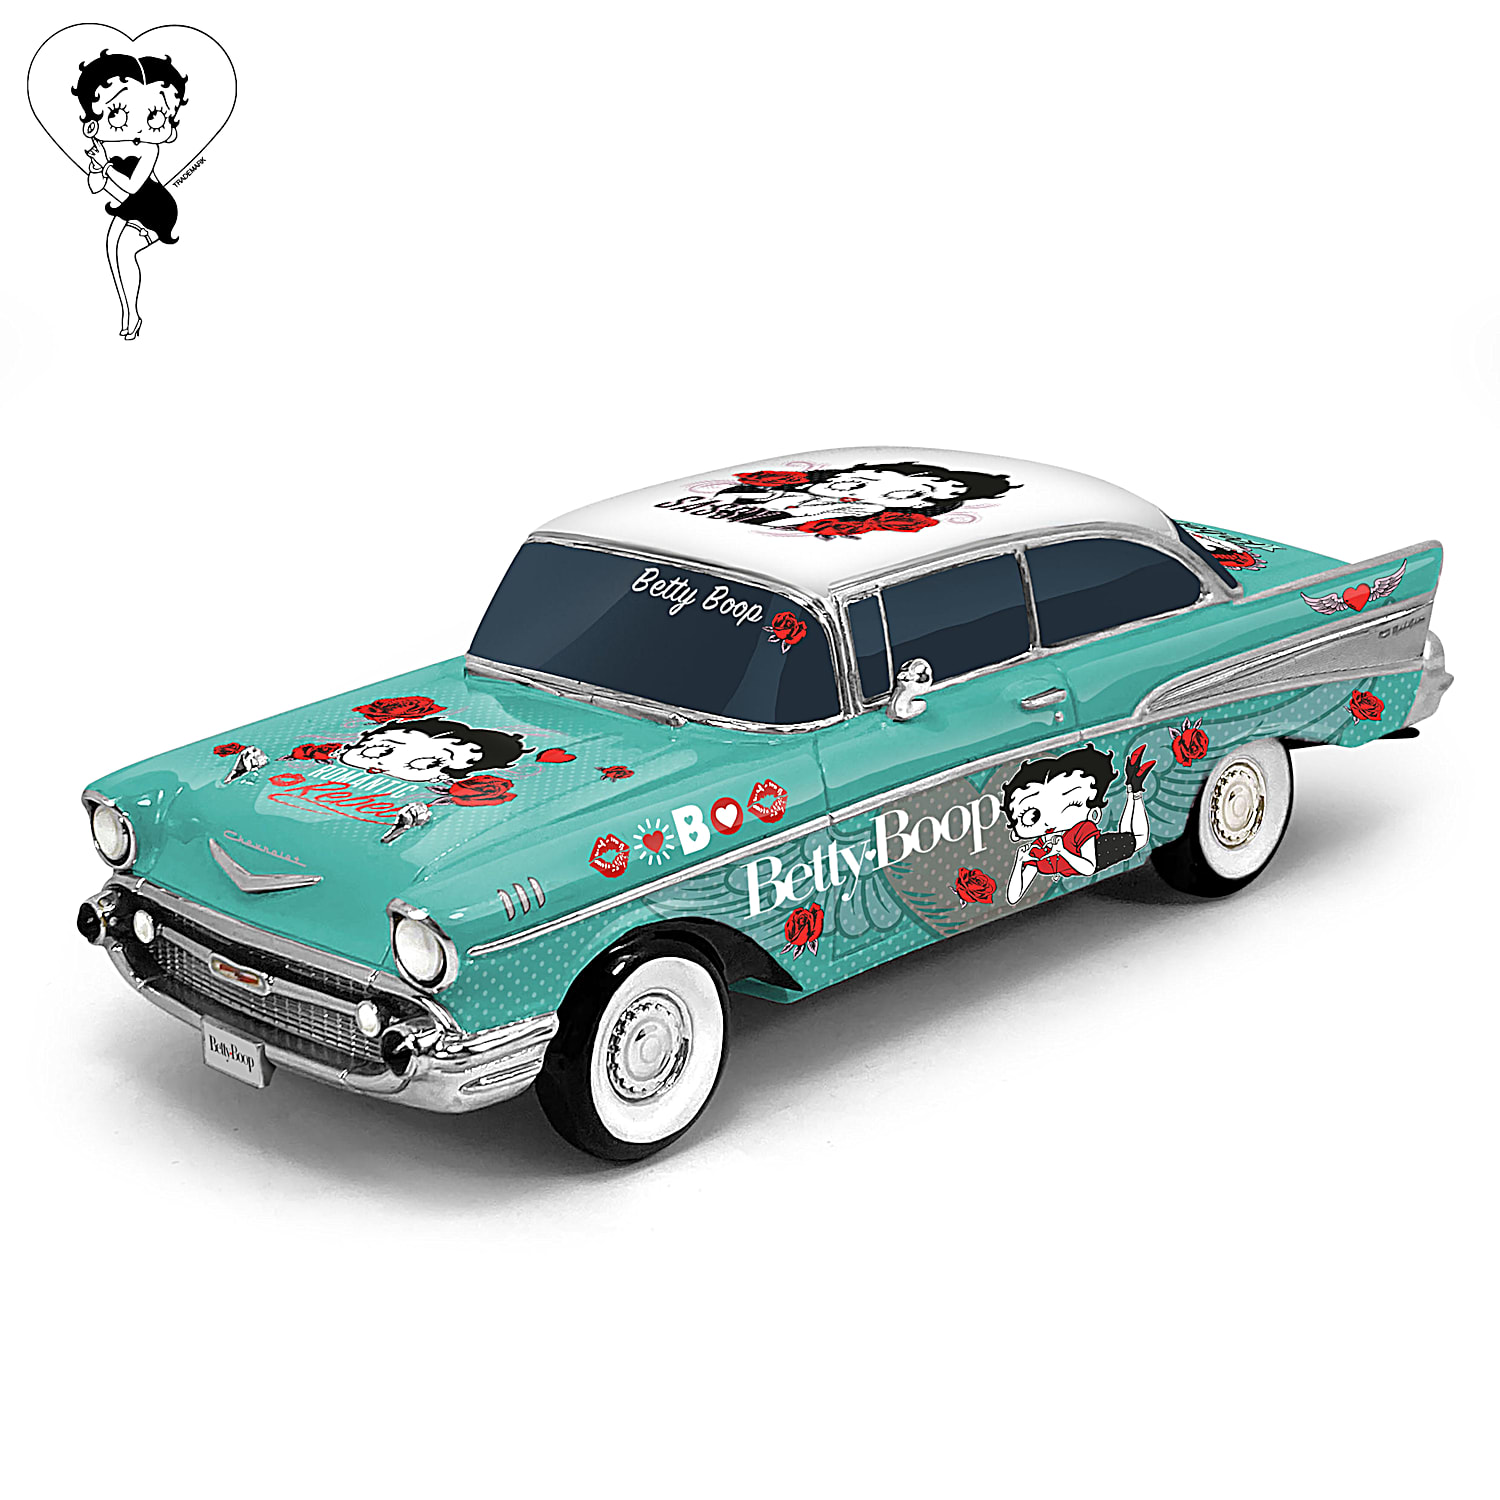 Betty Boop Classic Curves 1957 Chevrolet Bel Air 1:18-Scale Sculpture  Featuring A High-Gloss Paint Finish And Adorned With Hand-Applied Betty Boop  Art